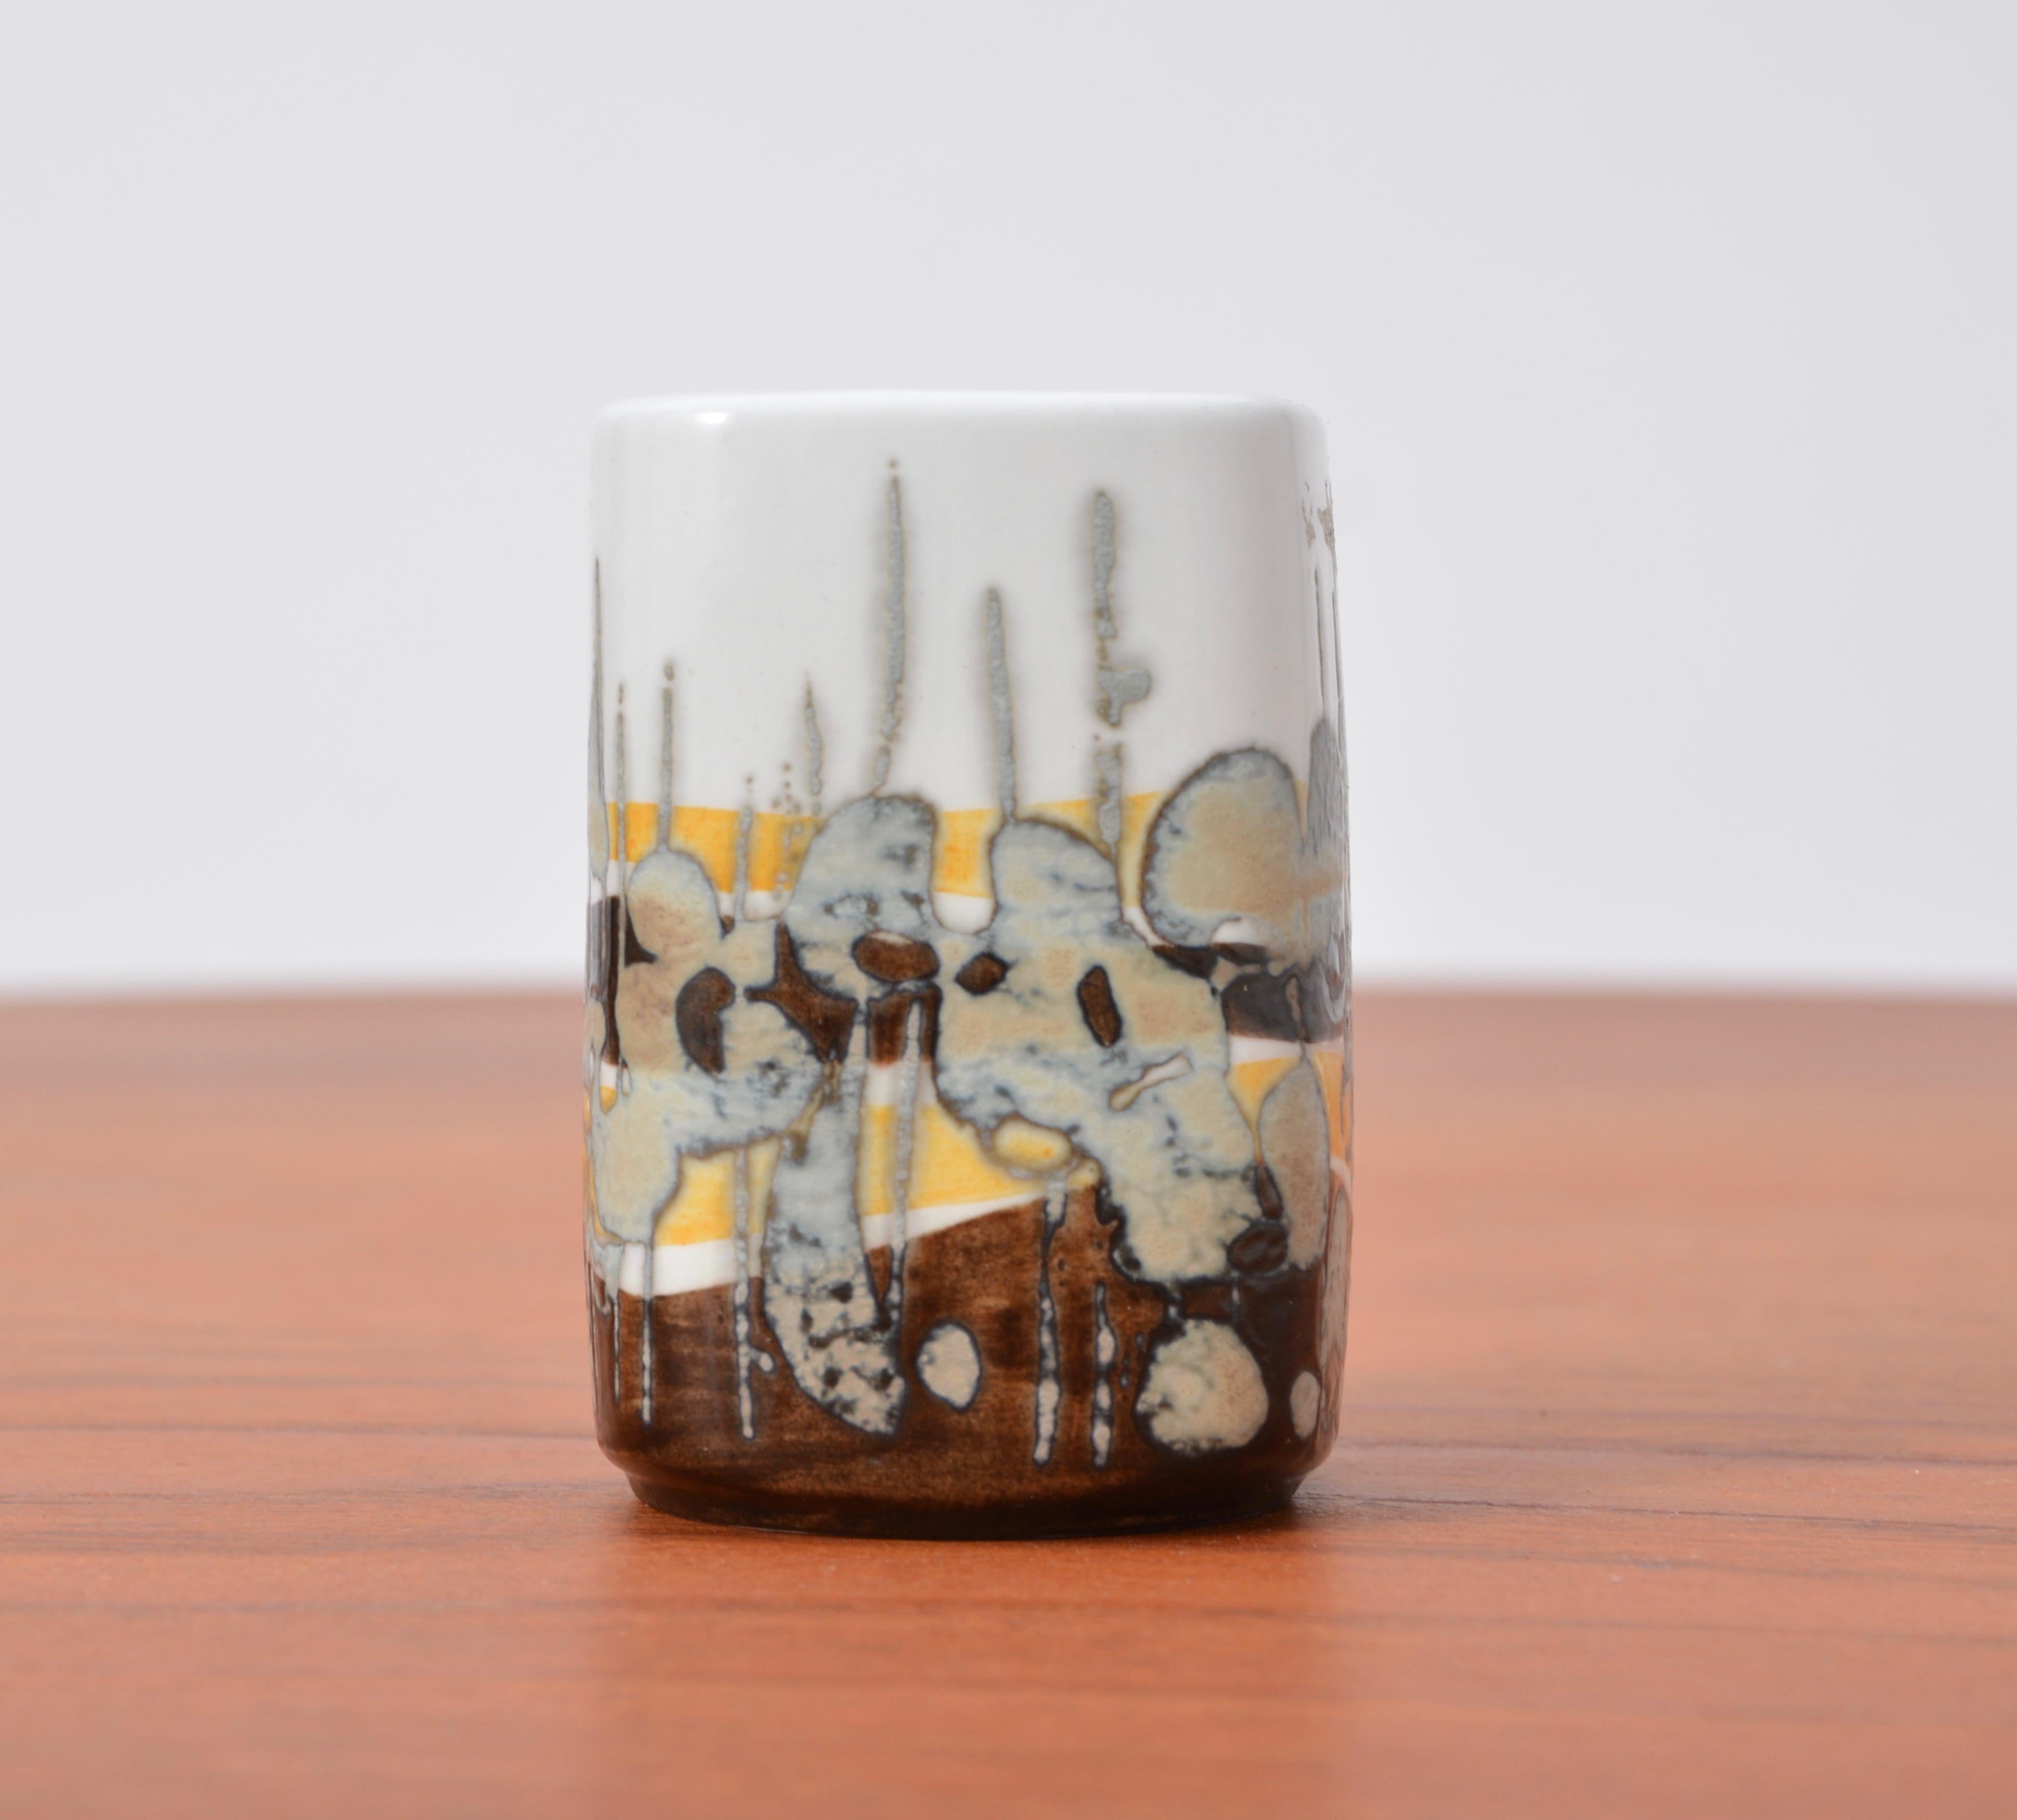 Small Mid-Century Modern Baca vase by Ivan Weiss for Royal Copenhagen, 1960s
This small ceramic vase or decorative object is part of the Baca series by Ivan Weiss for Royal Copenhagen. It features an abstract pattern with colors of white, yellow and